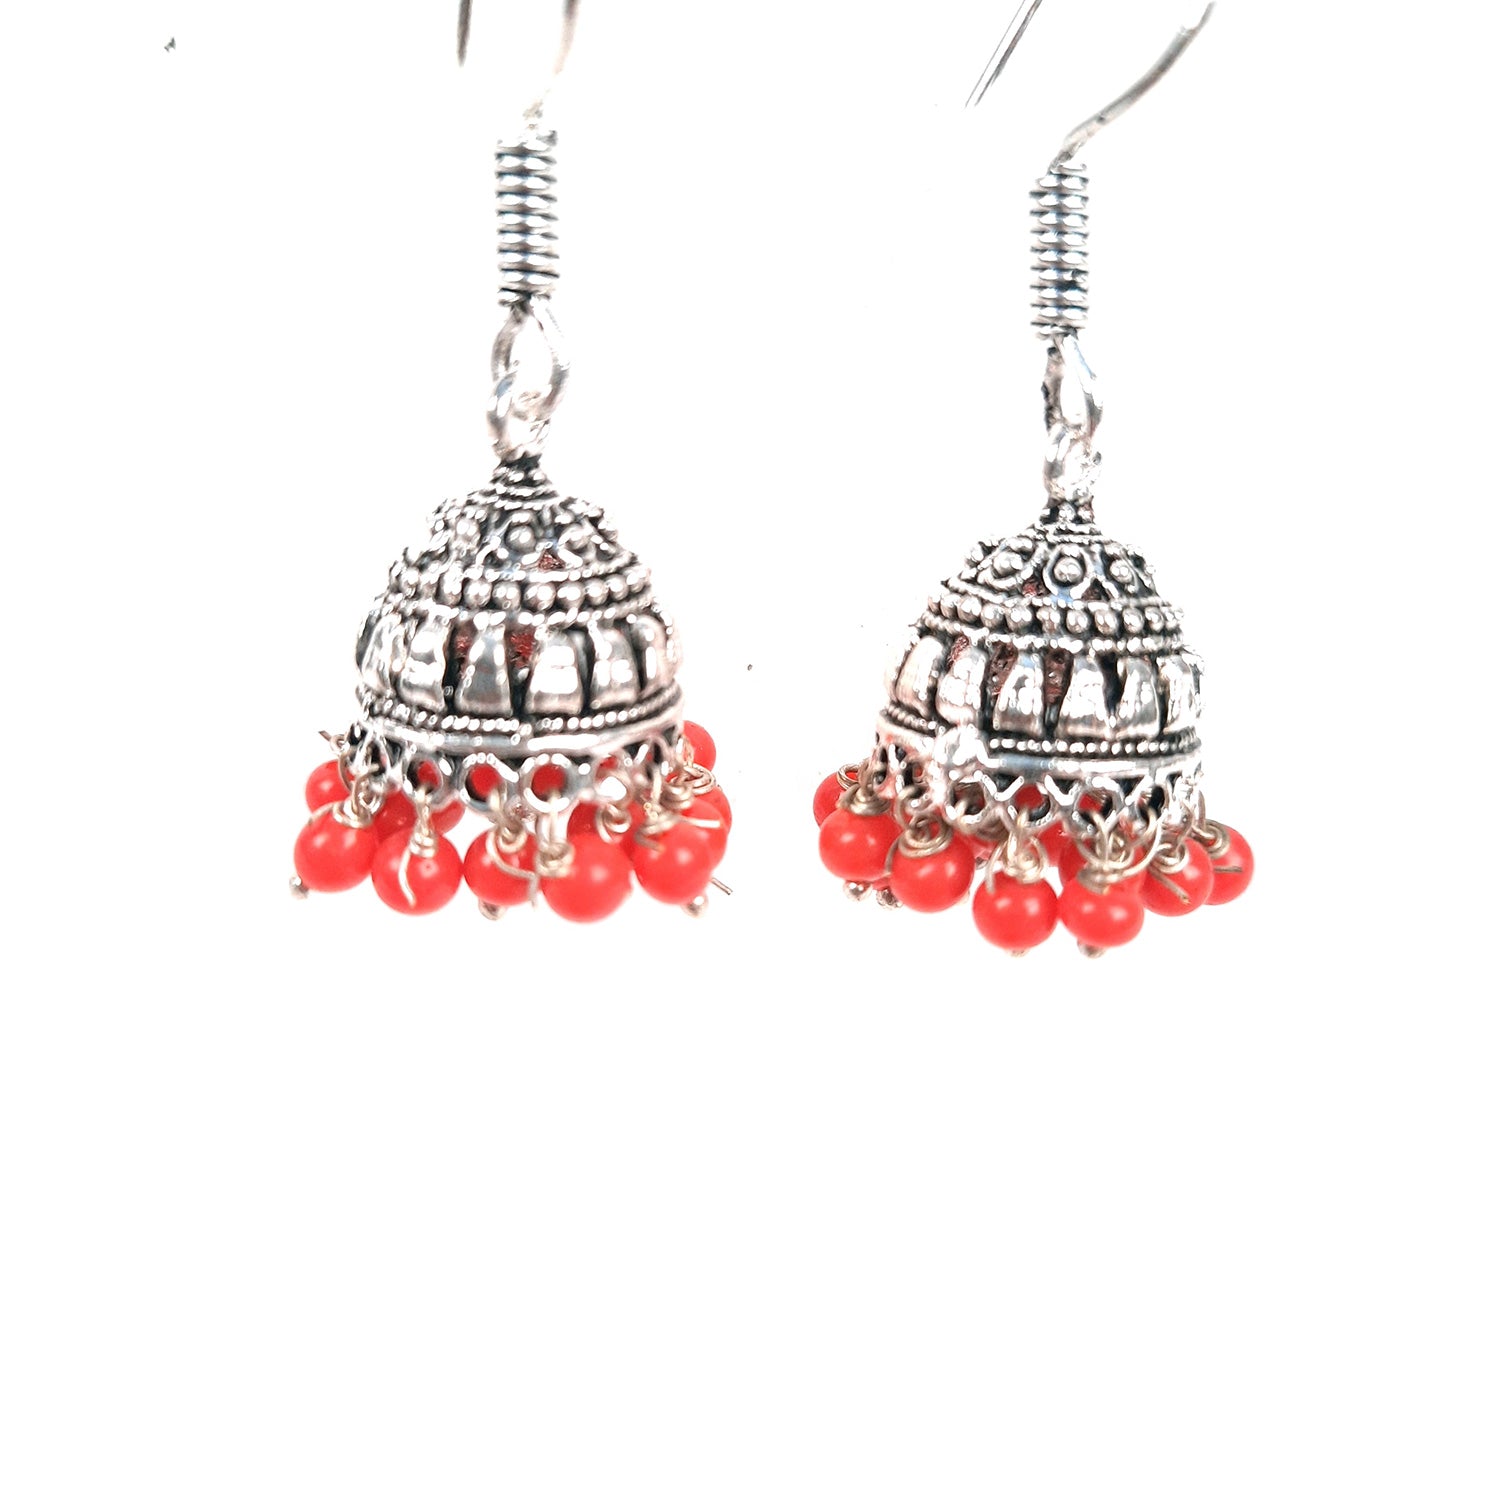 Earrings Jhumka - for Girls and Women | Oxidised Jewelry | Latest Stylish Fashion Jewellery | Gifts for Her, Friendship Day, Valentine's Day Gift - apkamart